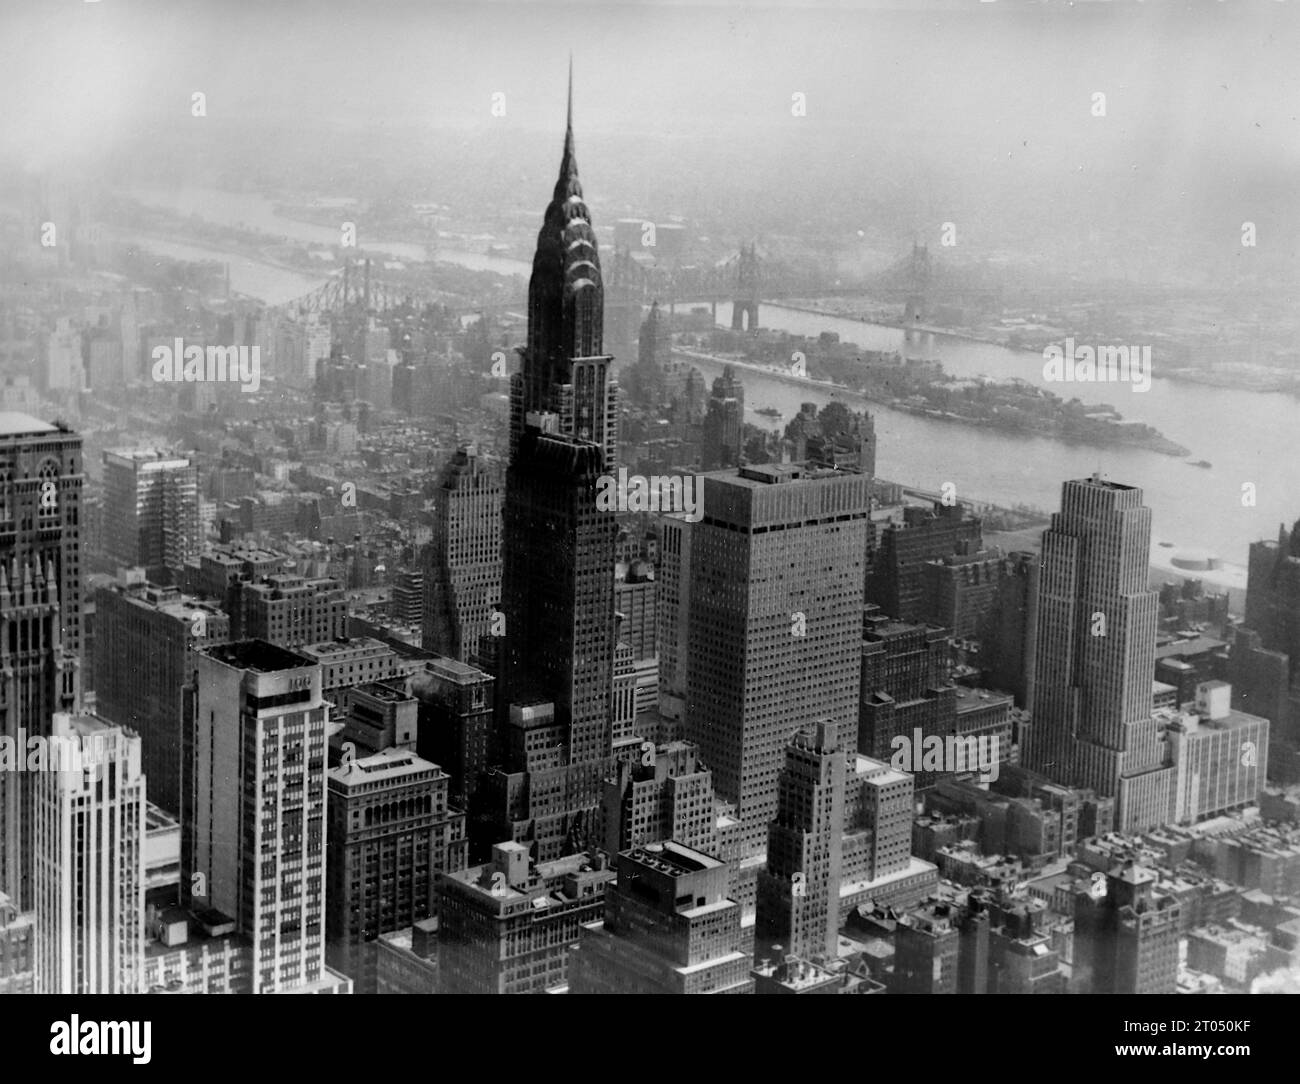 A view from the Empire State Building including the Chrysler Building. This photograph is from an unattributed personal album of photographs of a cruise to New York dated 29th June to 13th August 1956. Sailing from Liverpool aboard the Cunard vessel M.V. Britannic and returning from New York to Southampton aboard the Cunard vessel R.M.S. Queen Mary. Average size of the original photographs was 4x3 inches. Stock Photo